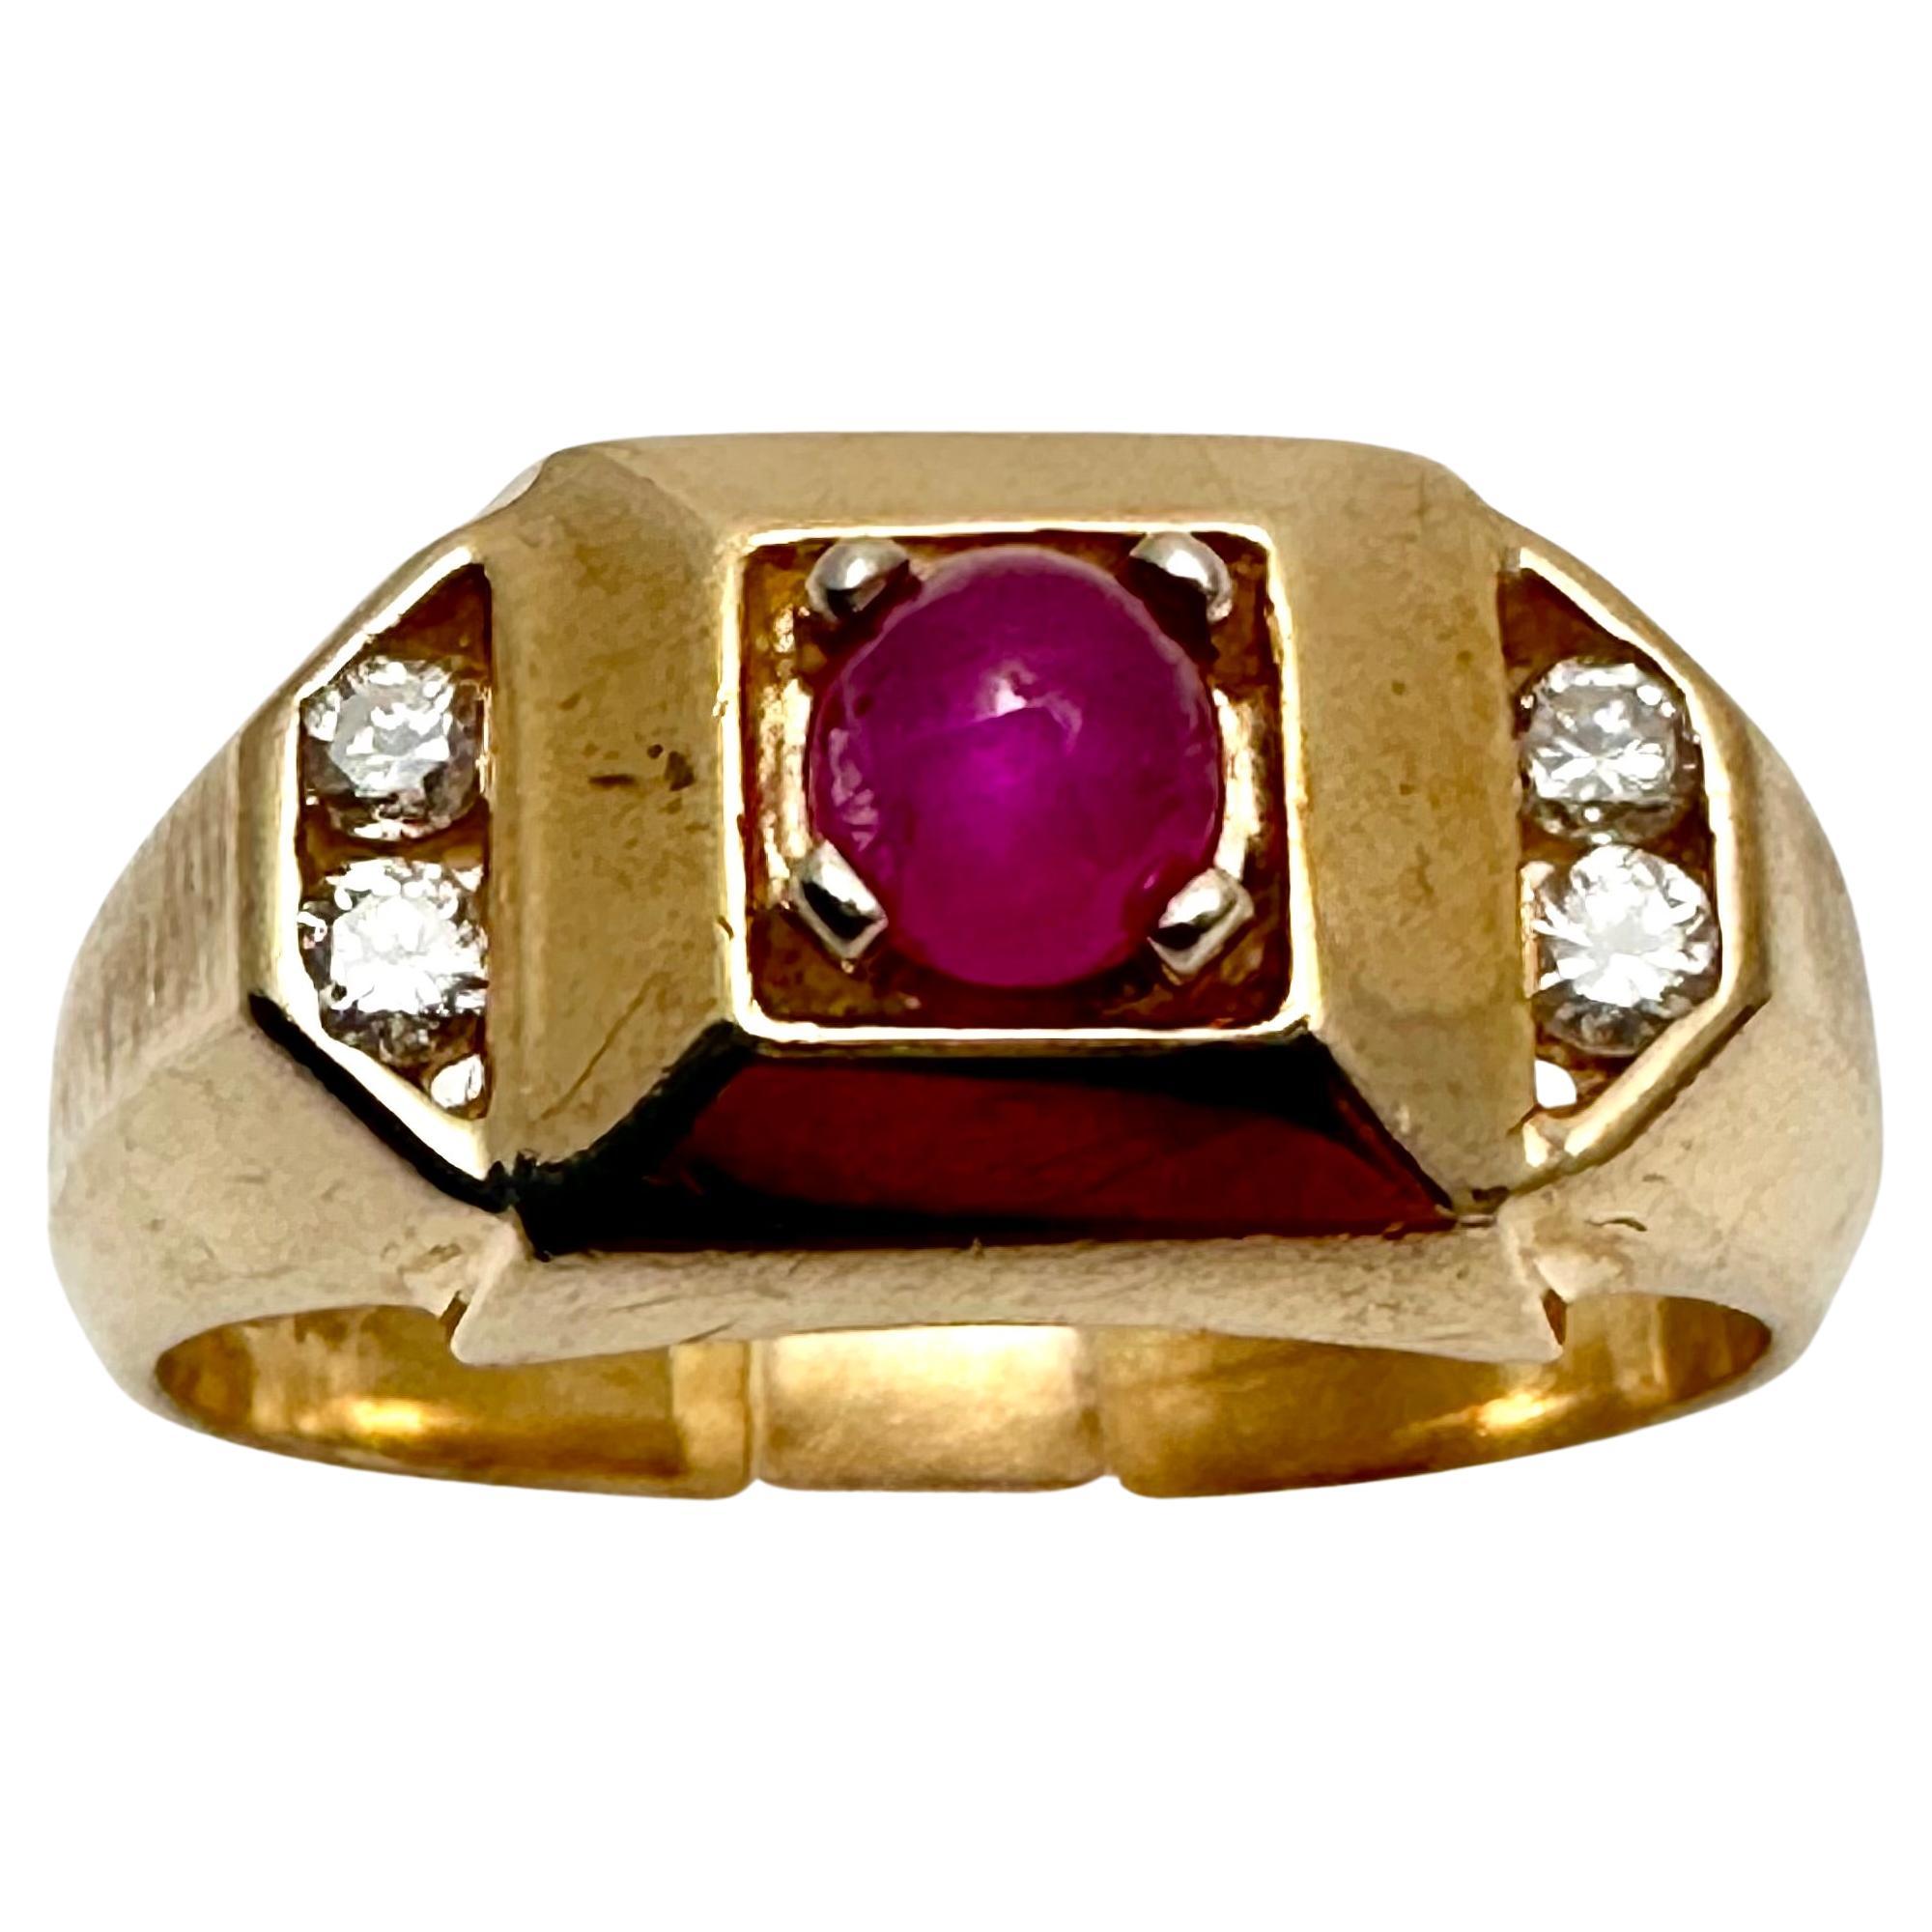 14k Yellow Gold 5mm Cabochon Ruby with 4 Round Diamonds Ring Size 9 1/2